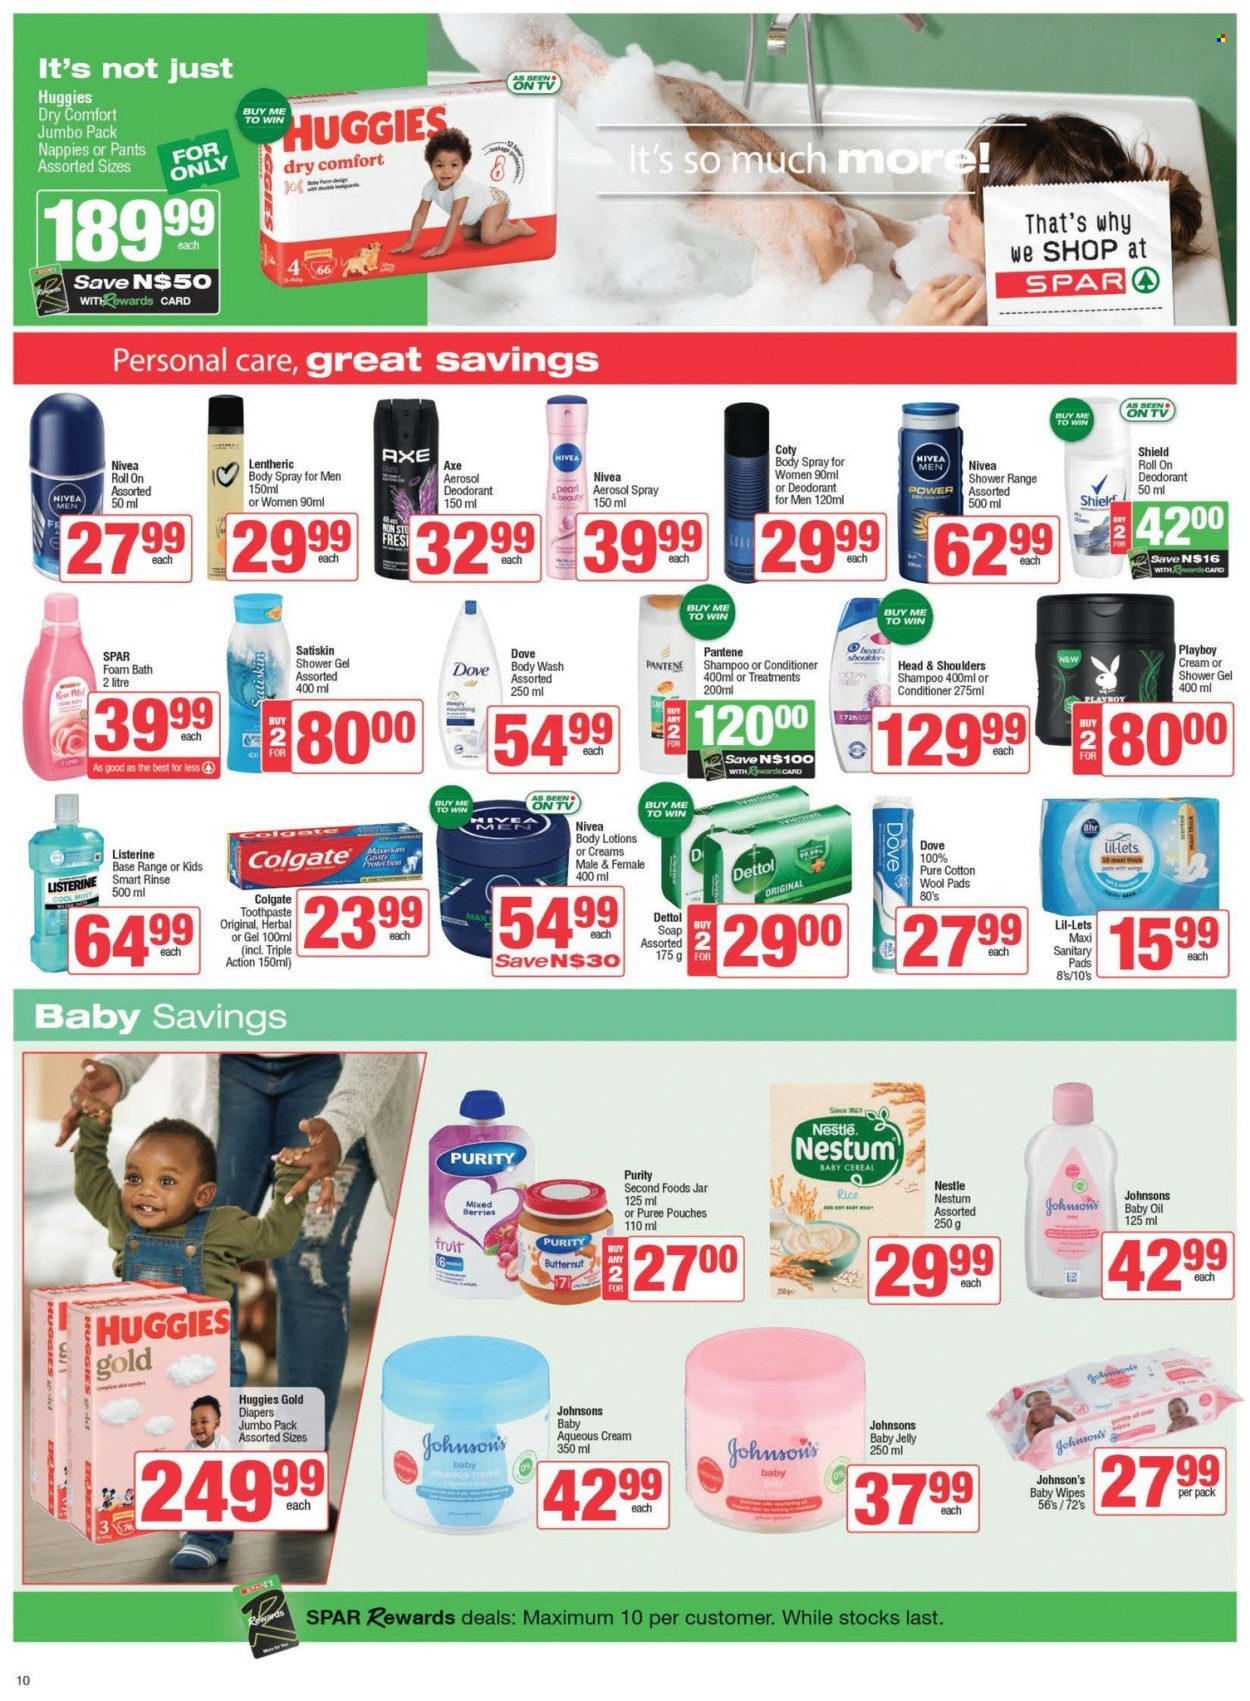 thumbnail - SPAR catalogue  - 23/04/2024 - 07/05/2024 - Sales products - butternut squash, jelly, Dove, Nestlé, cereals, rice, baby food pouch, Purity, baby snack, wipes, Huggies, pants, baby wipes, nappies, Johnson's, pads, Dettol, body wash, shampoo, shower gel, Nivea, bath foam, Satiskin, soap, Nivea Men, Colgate, Listerine, toothpaste, sanitary pads, Lil-lets, conditioner, Head & Shoulders, Pantene, body lotion, body spray, Axe. Page 10.